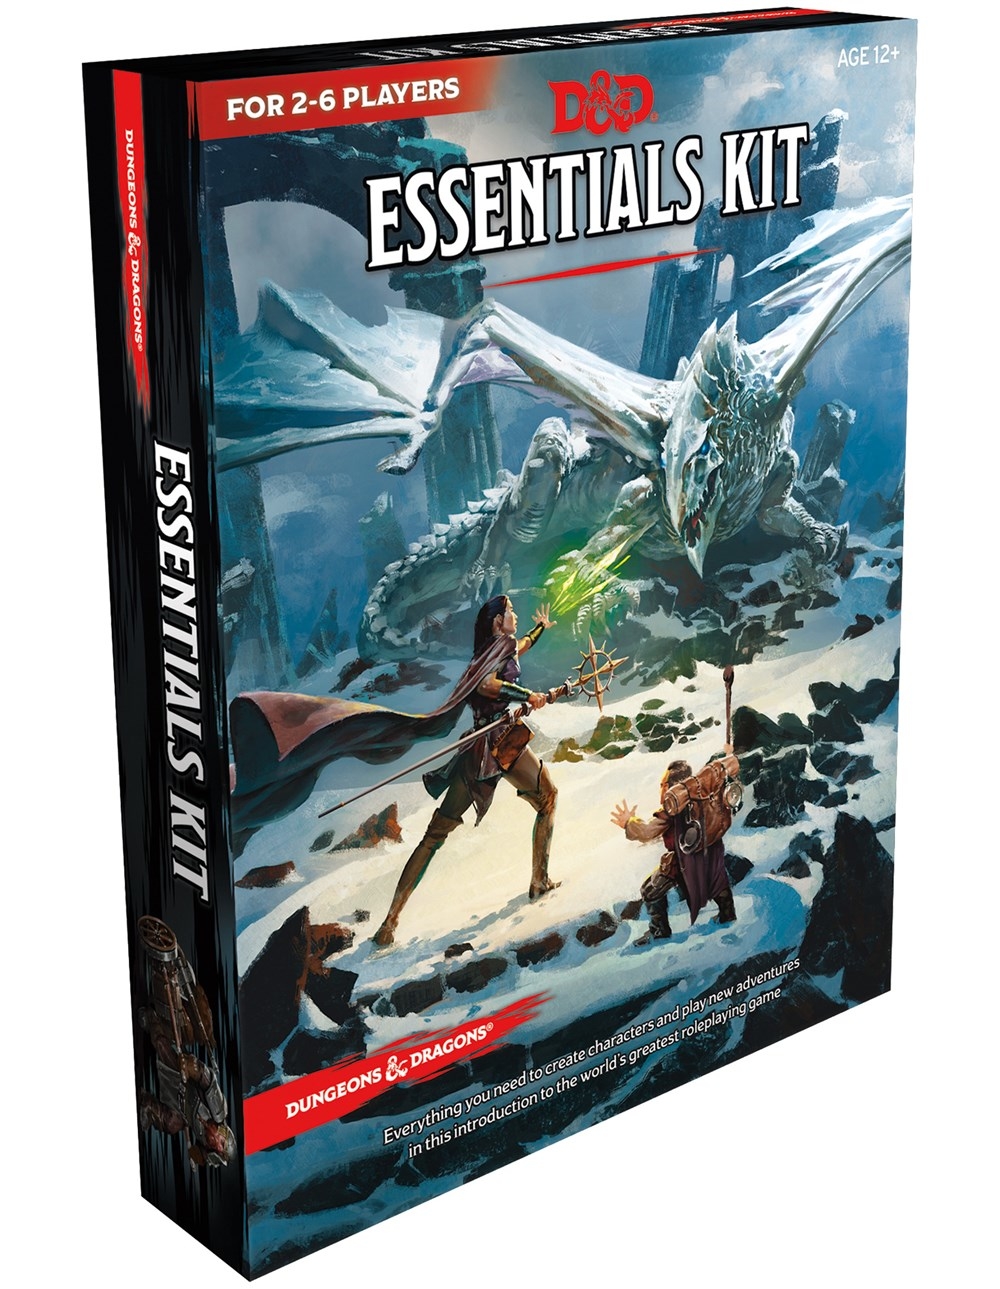 Dungeons & Dragons Role Playing Game Essentials Kit